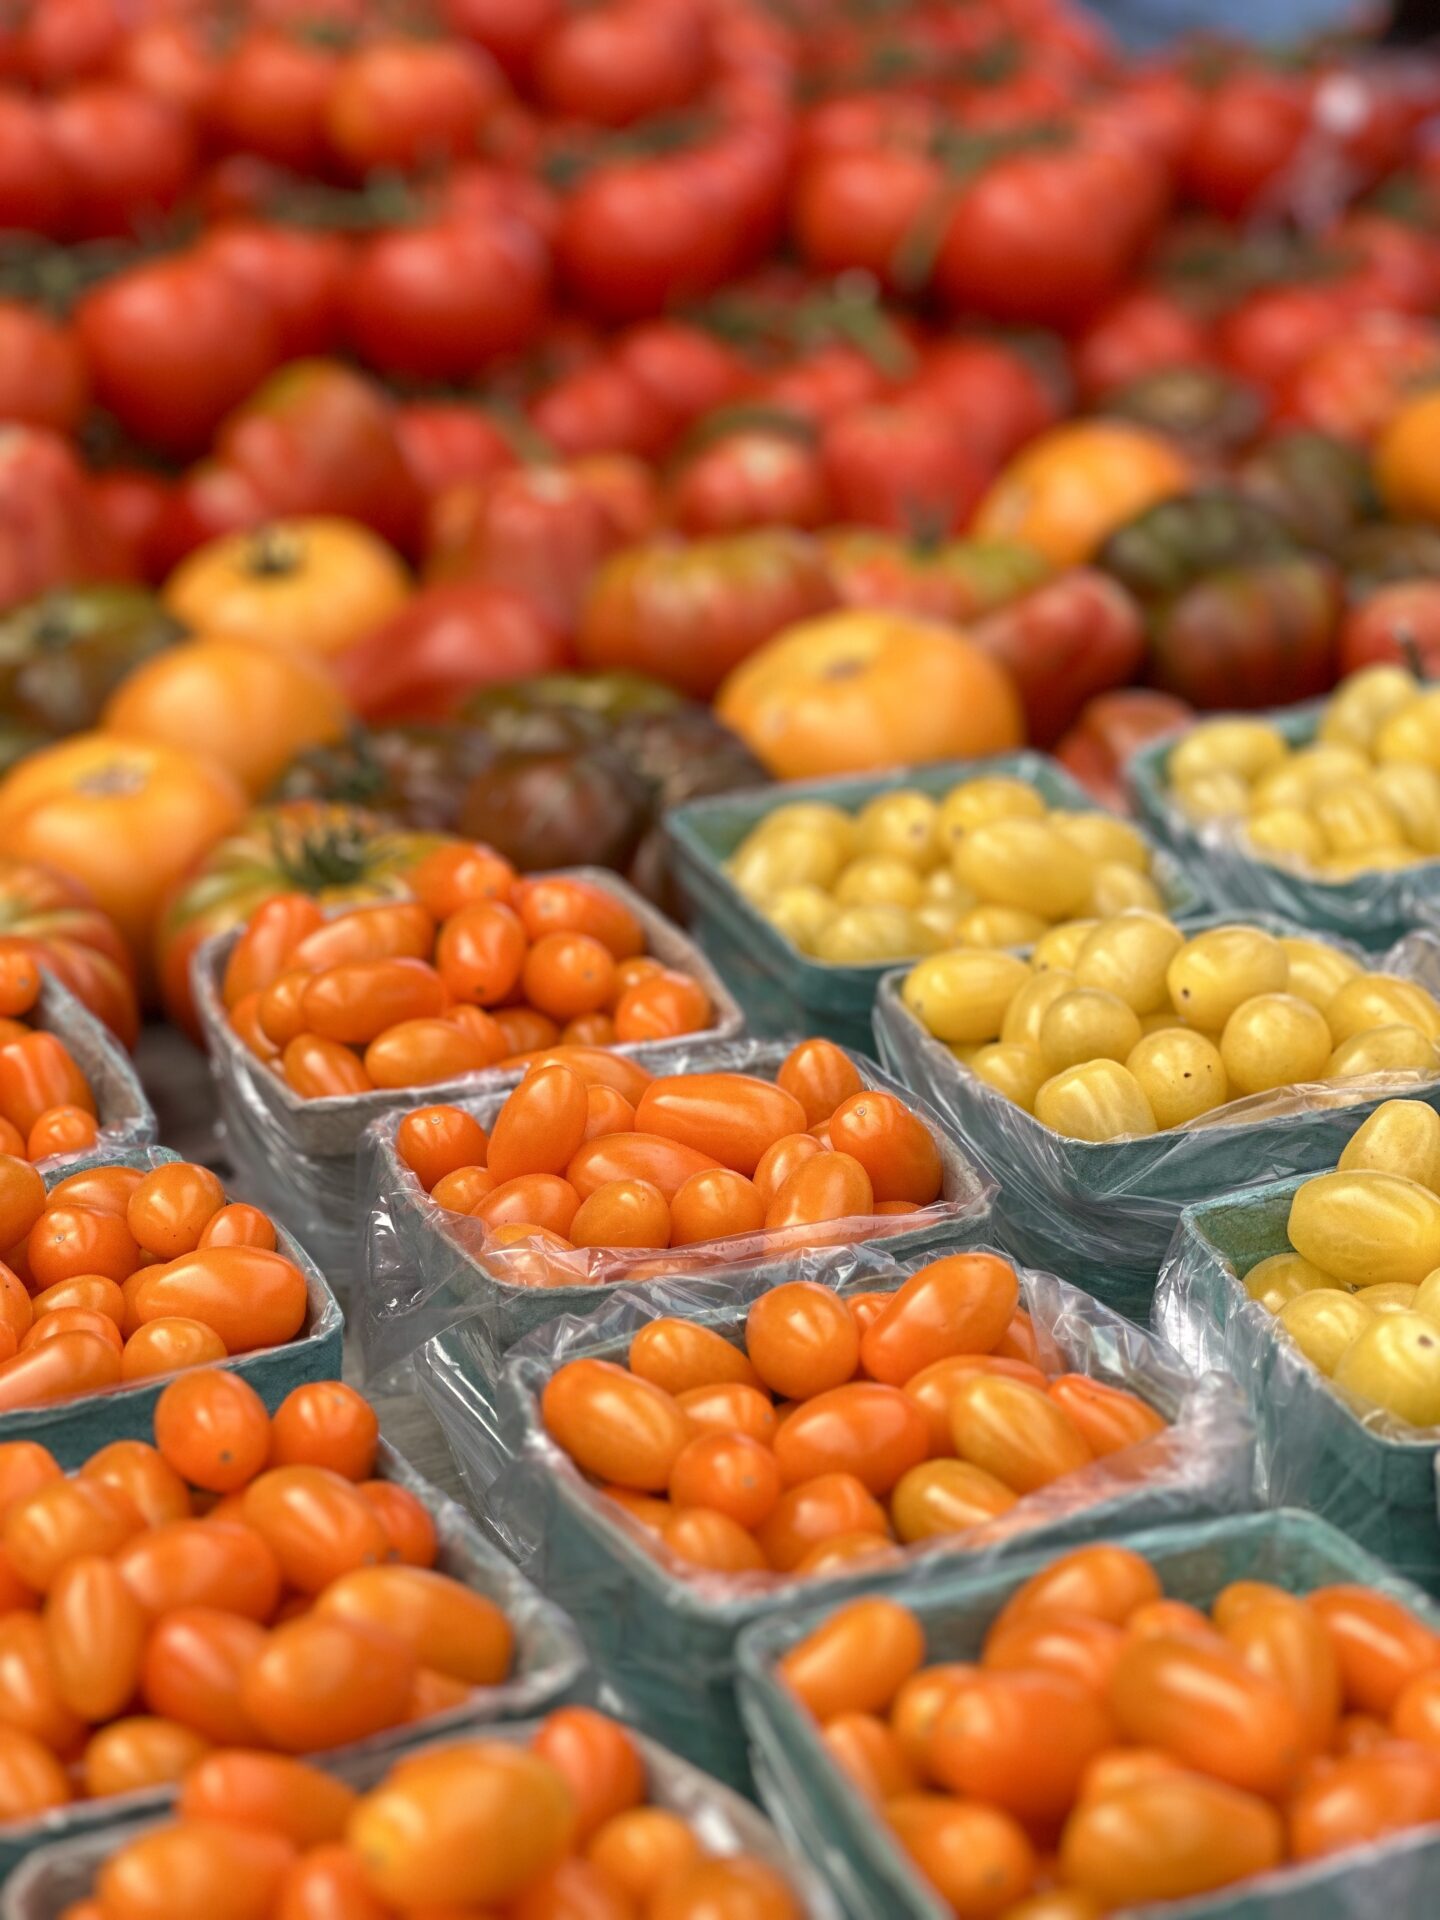 Pints of orange and yellow cherry tomatoes are seen at a farm stand with larger multicoloured heirloom tomatoes in the background